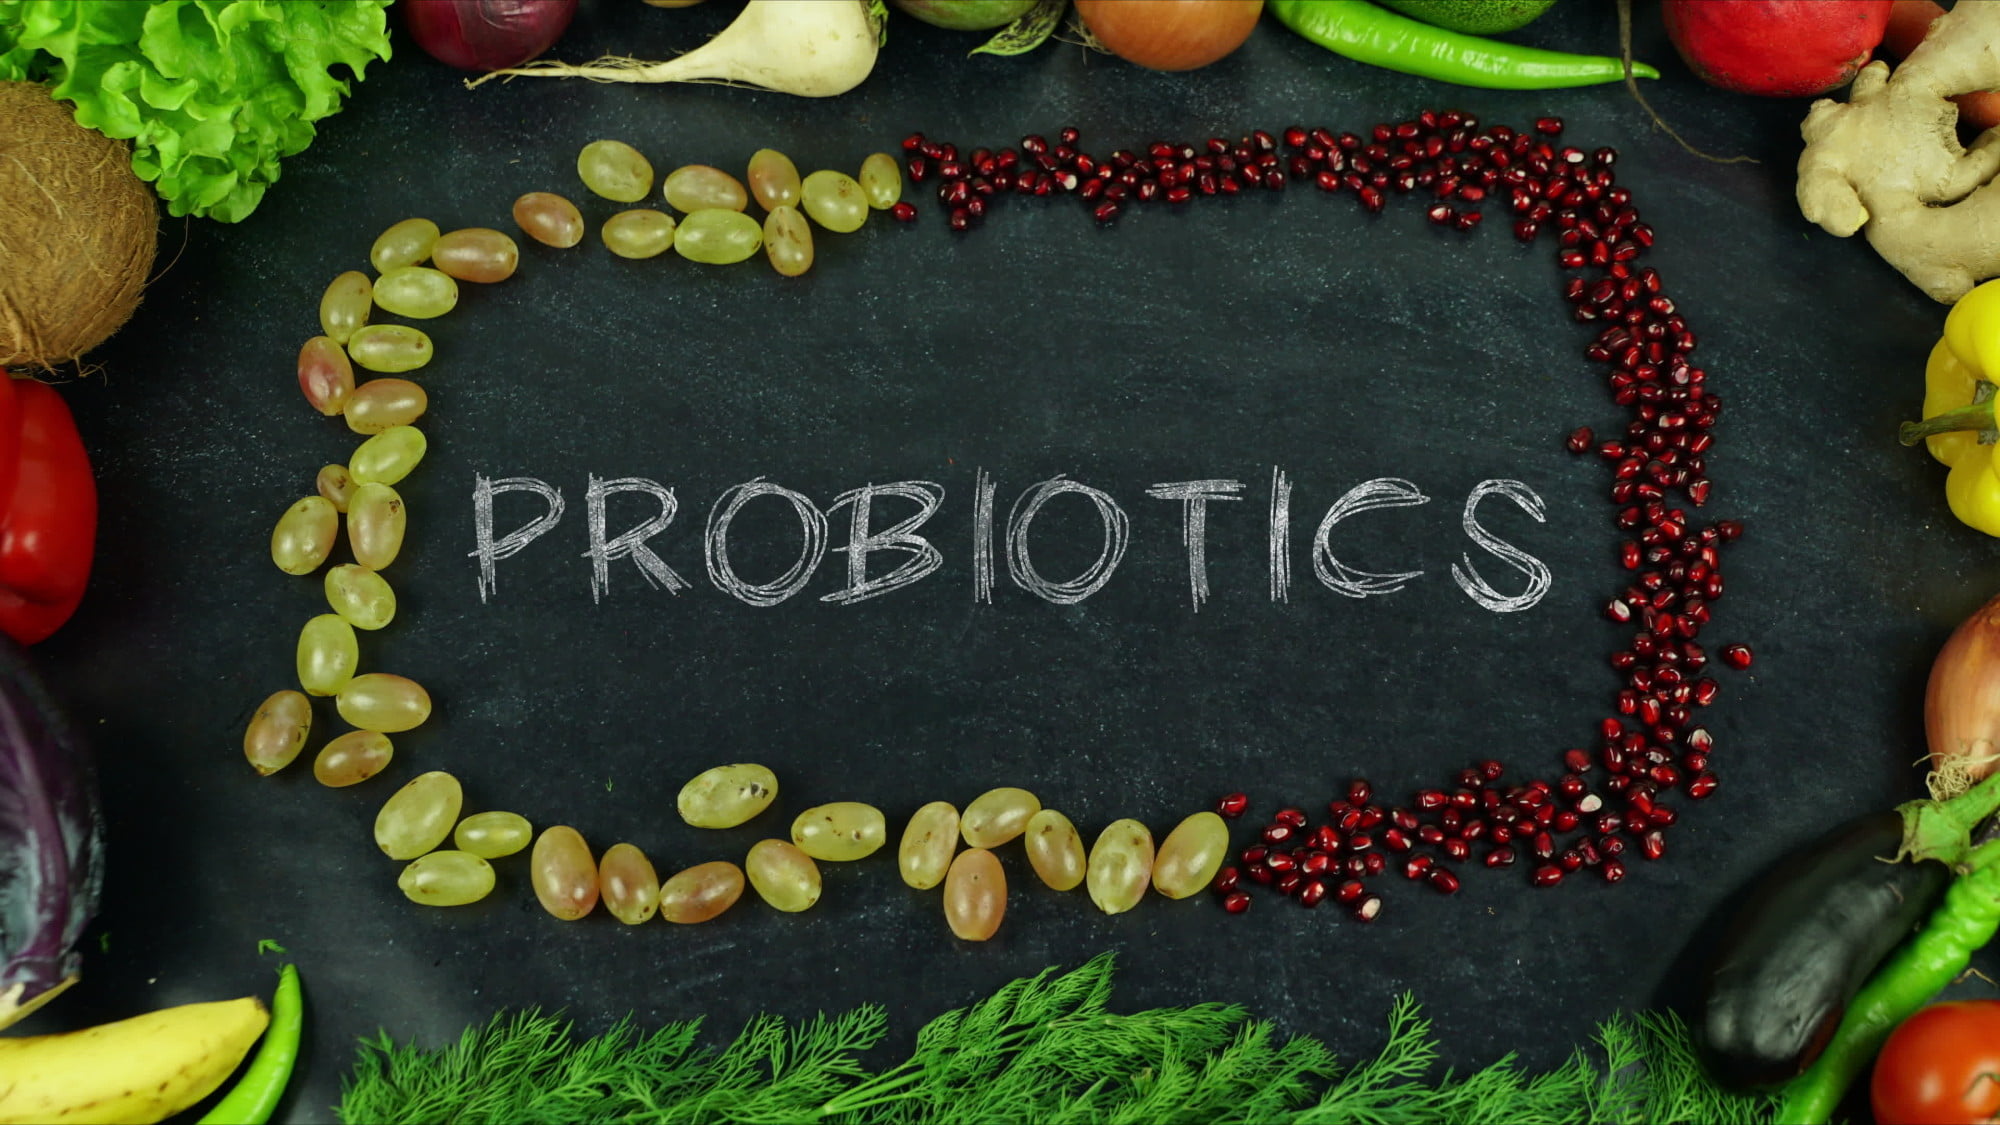 Many people are unaware of the exponential benefits of probiotics. Click here to learn how they can improve your digestion, immunity, and more.